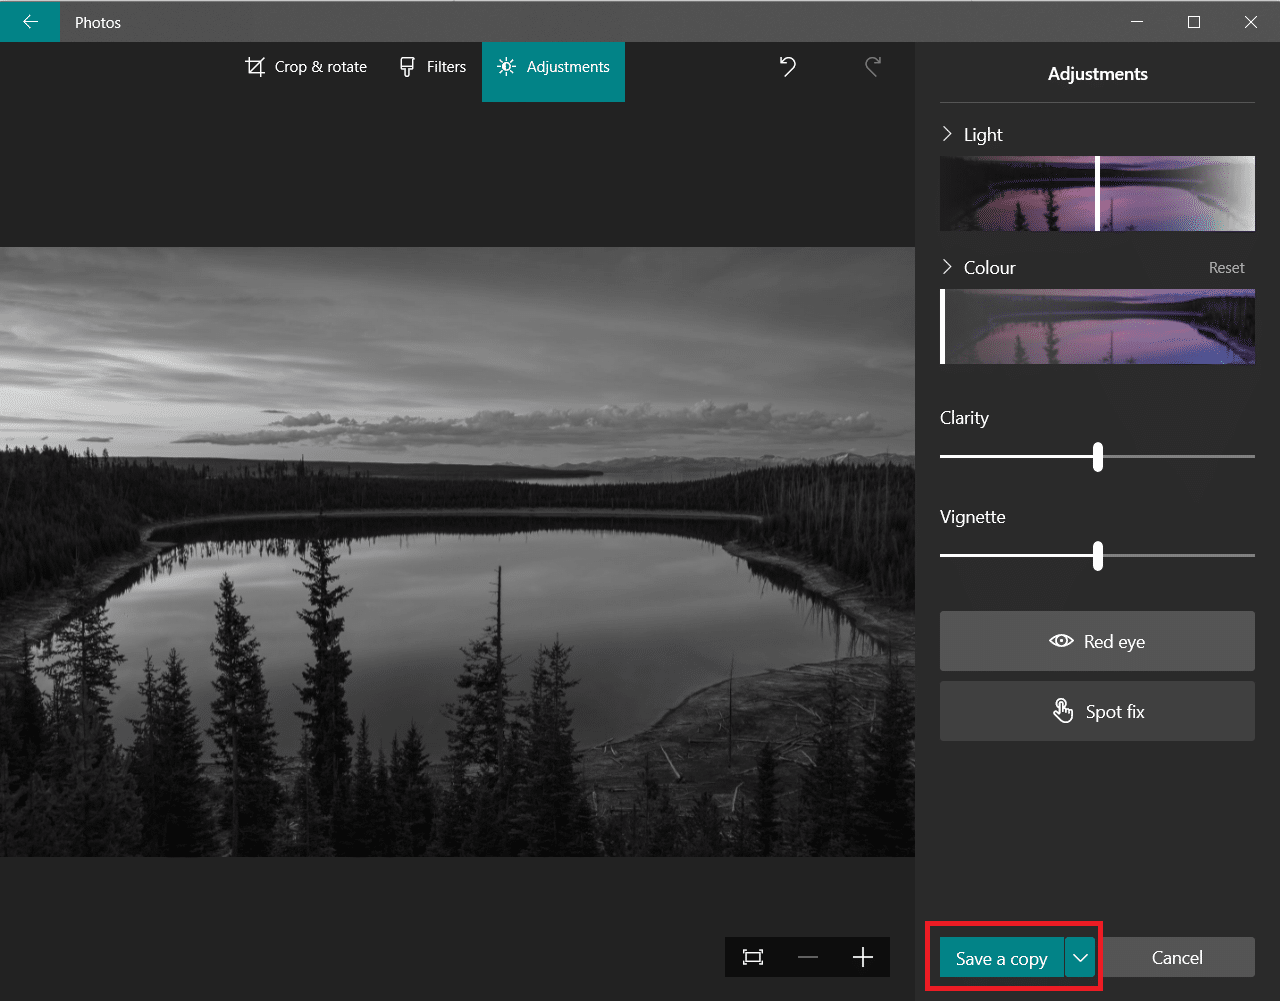 Save a copy option. How to Convert Image to Grayscale Paint